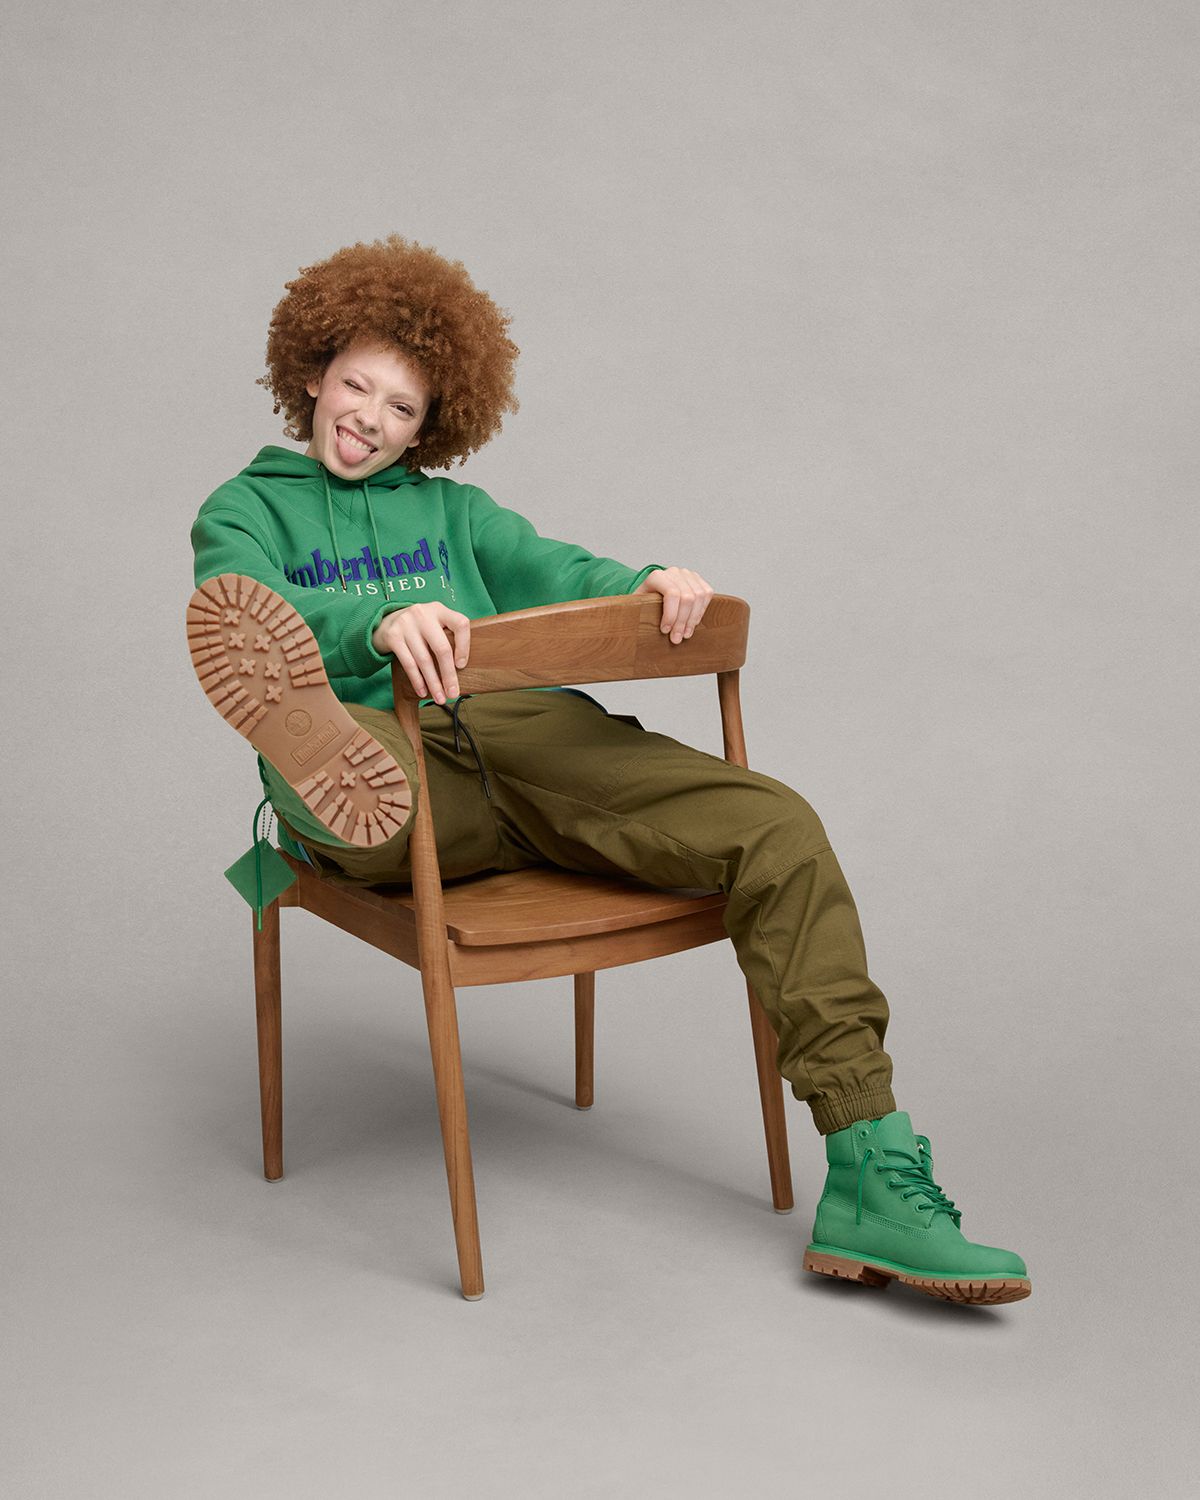 A person sitting on a wooden chair with a green sweatshirt kicking one leg in air. They are wearing green Timberland boots